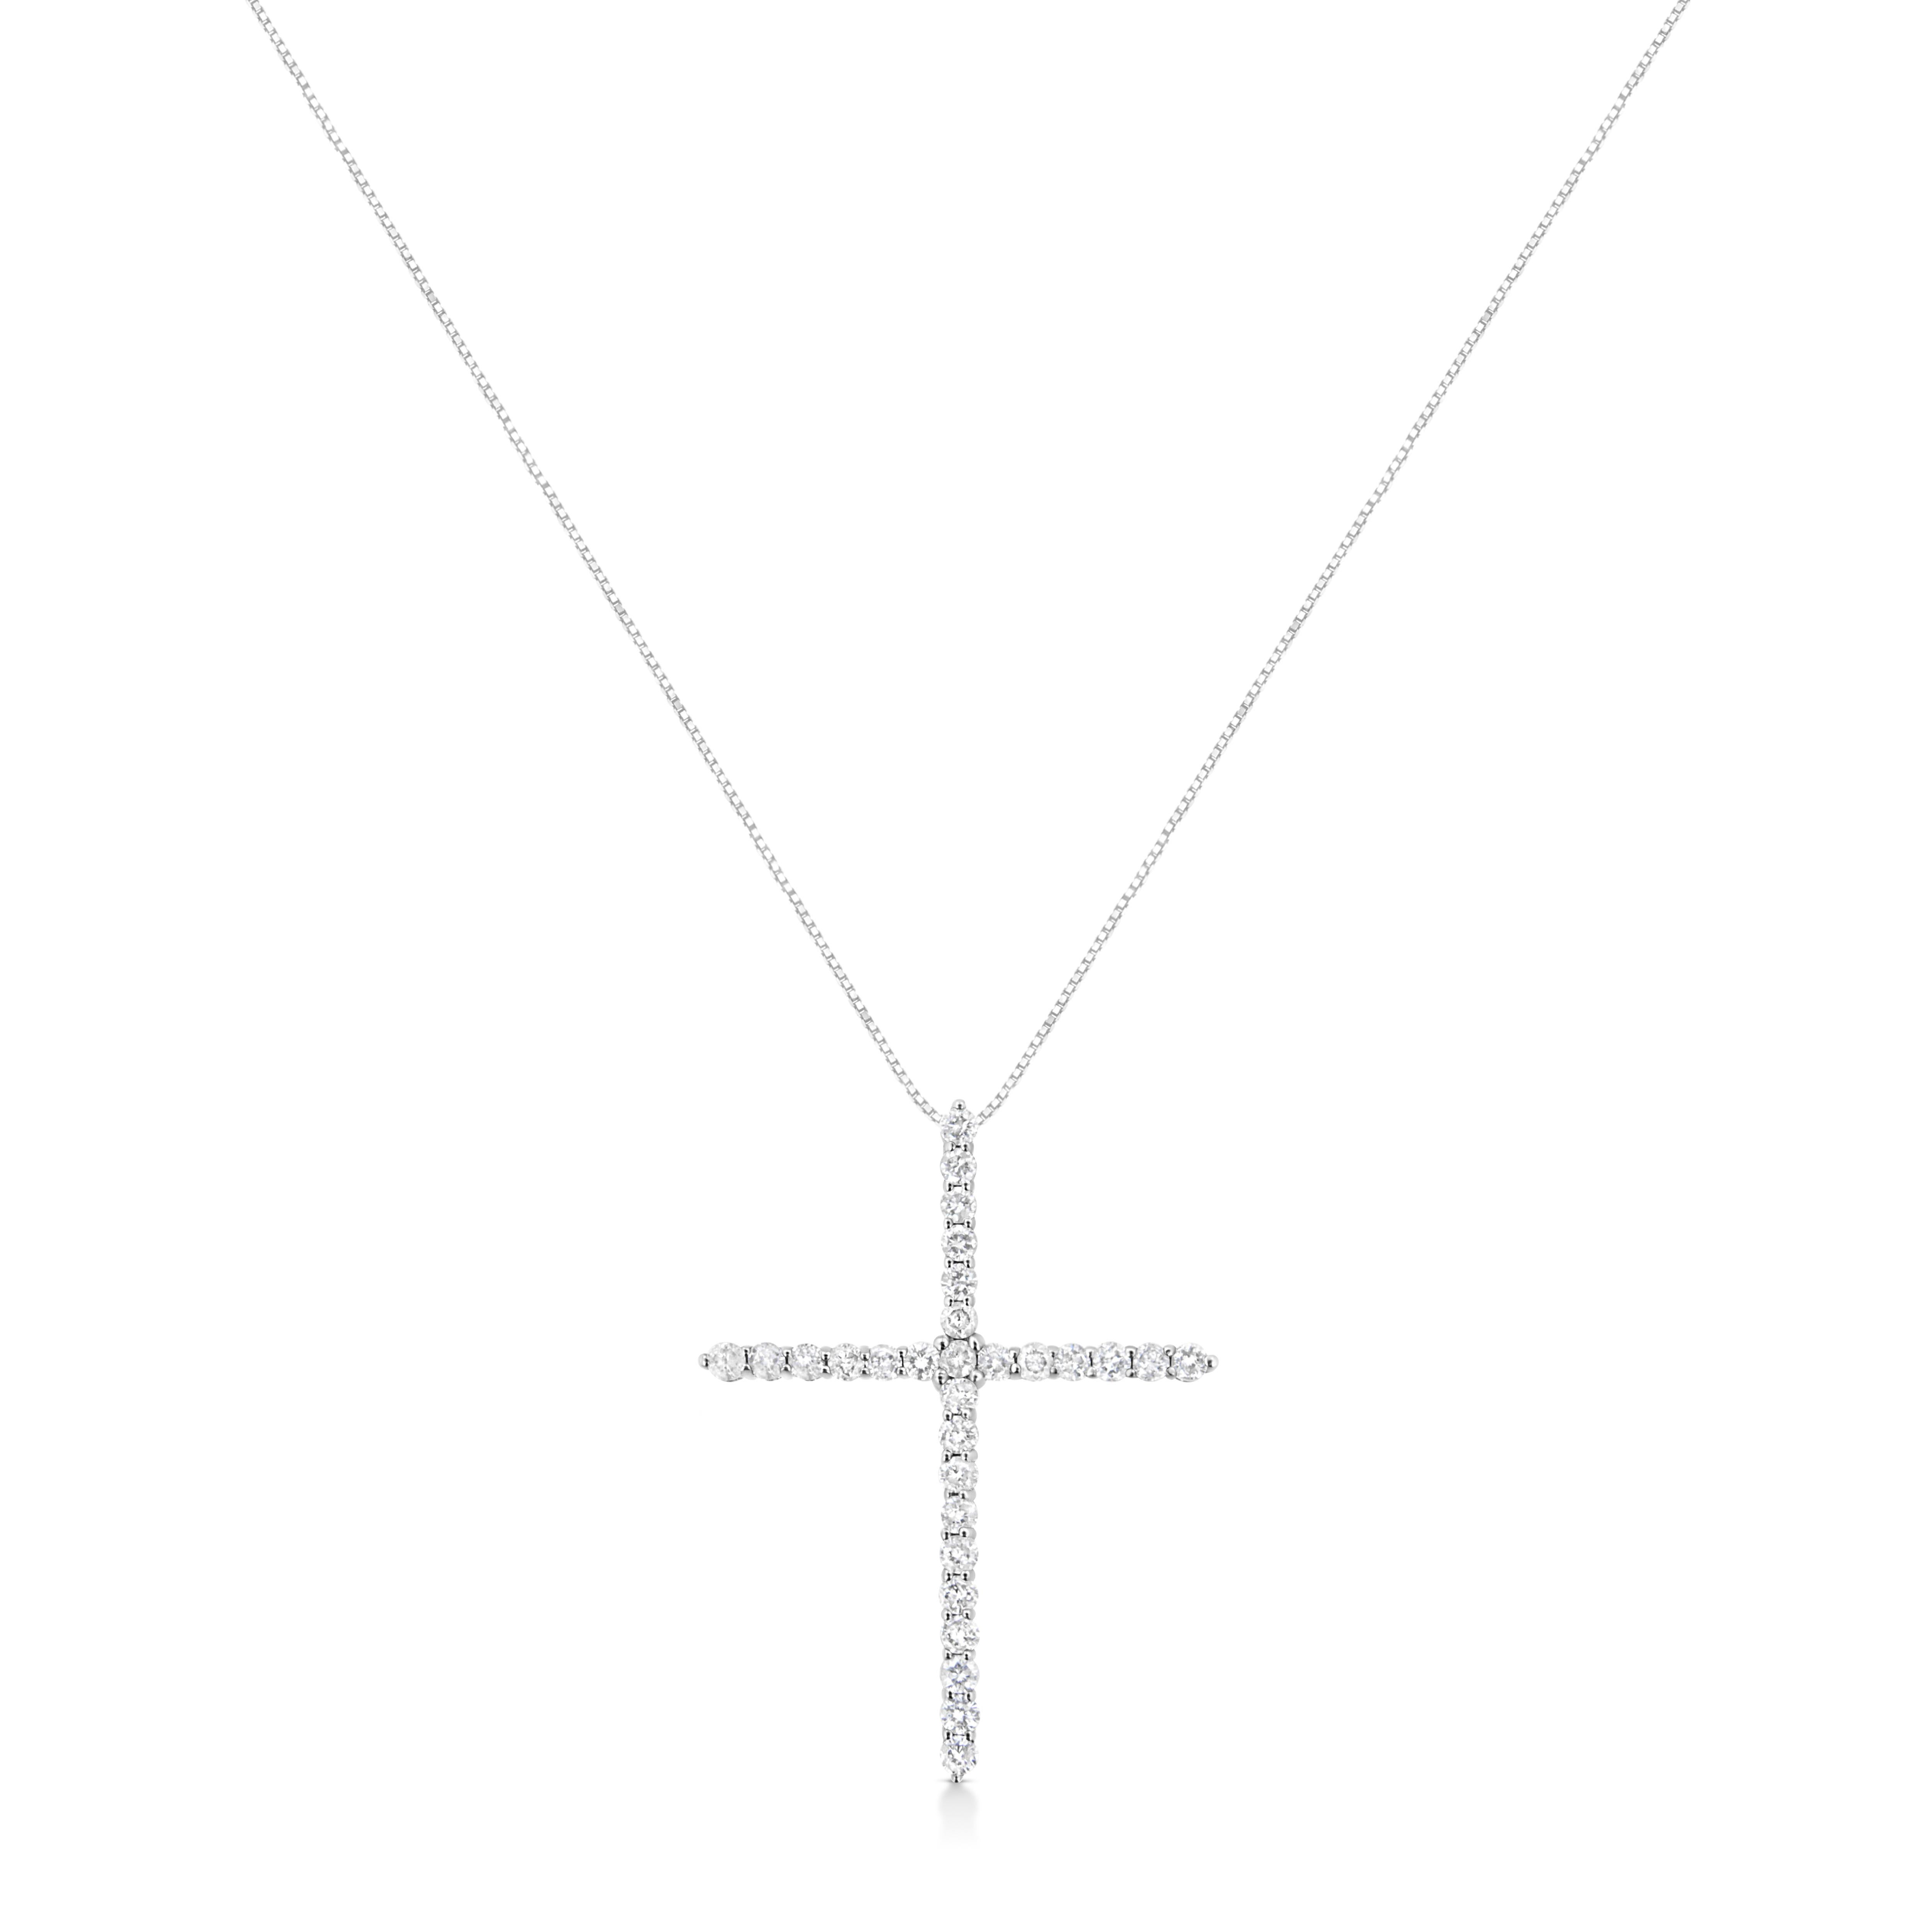 Faith meets fashion in this graceful diamond cross pendant. Crafted in stunning .925 sterling silver, this feminine style crosses two single rows of shimmering prong-set diamonds to create an elegant design. Inspiring with 29 natural, sparkling